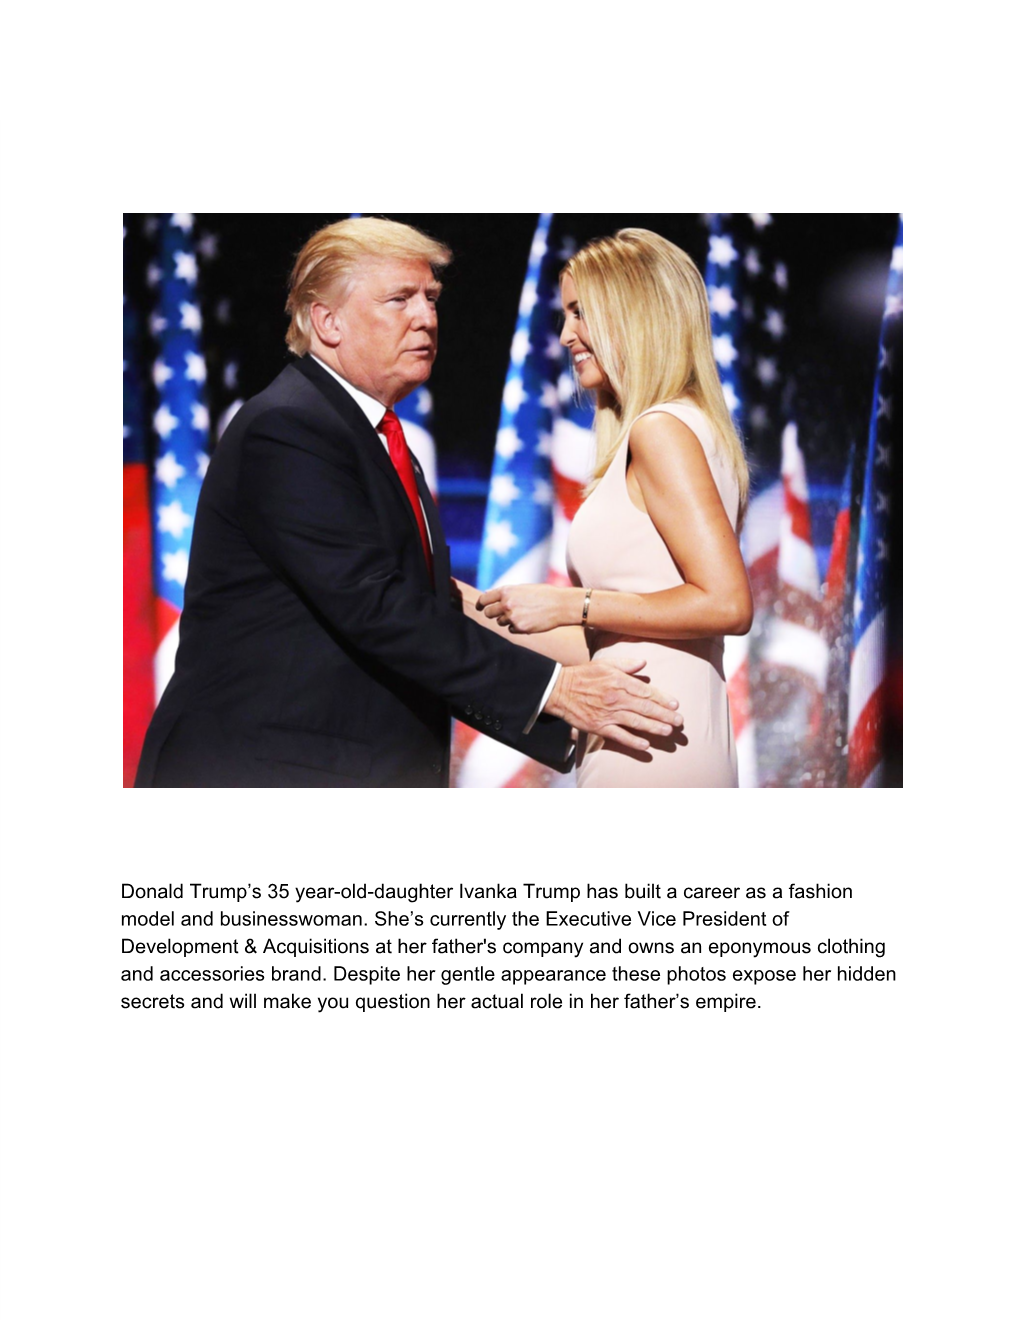 Donald Trump's 35 Year-Old-Daughter Ivanka Trump Has Built a Career As a Fashion Model and Businesswoman. She's Currently Th